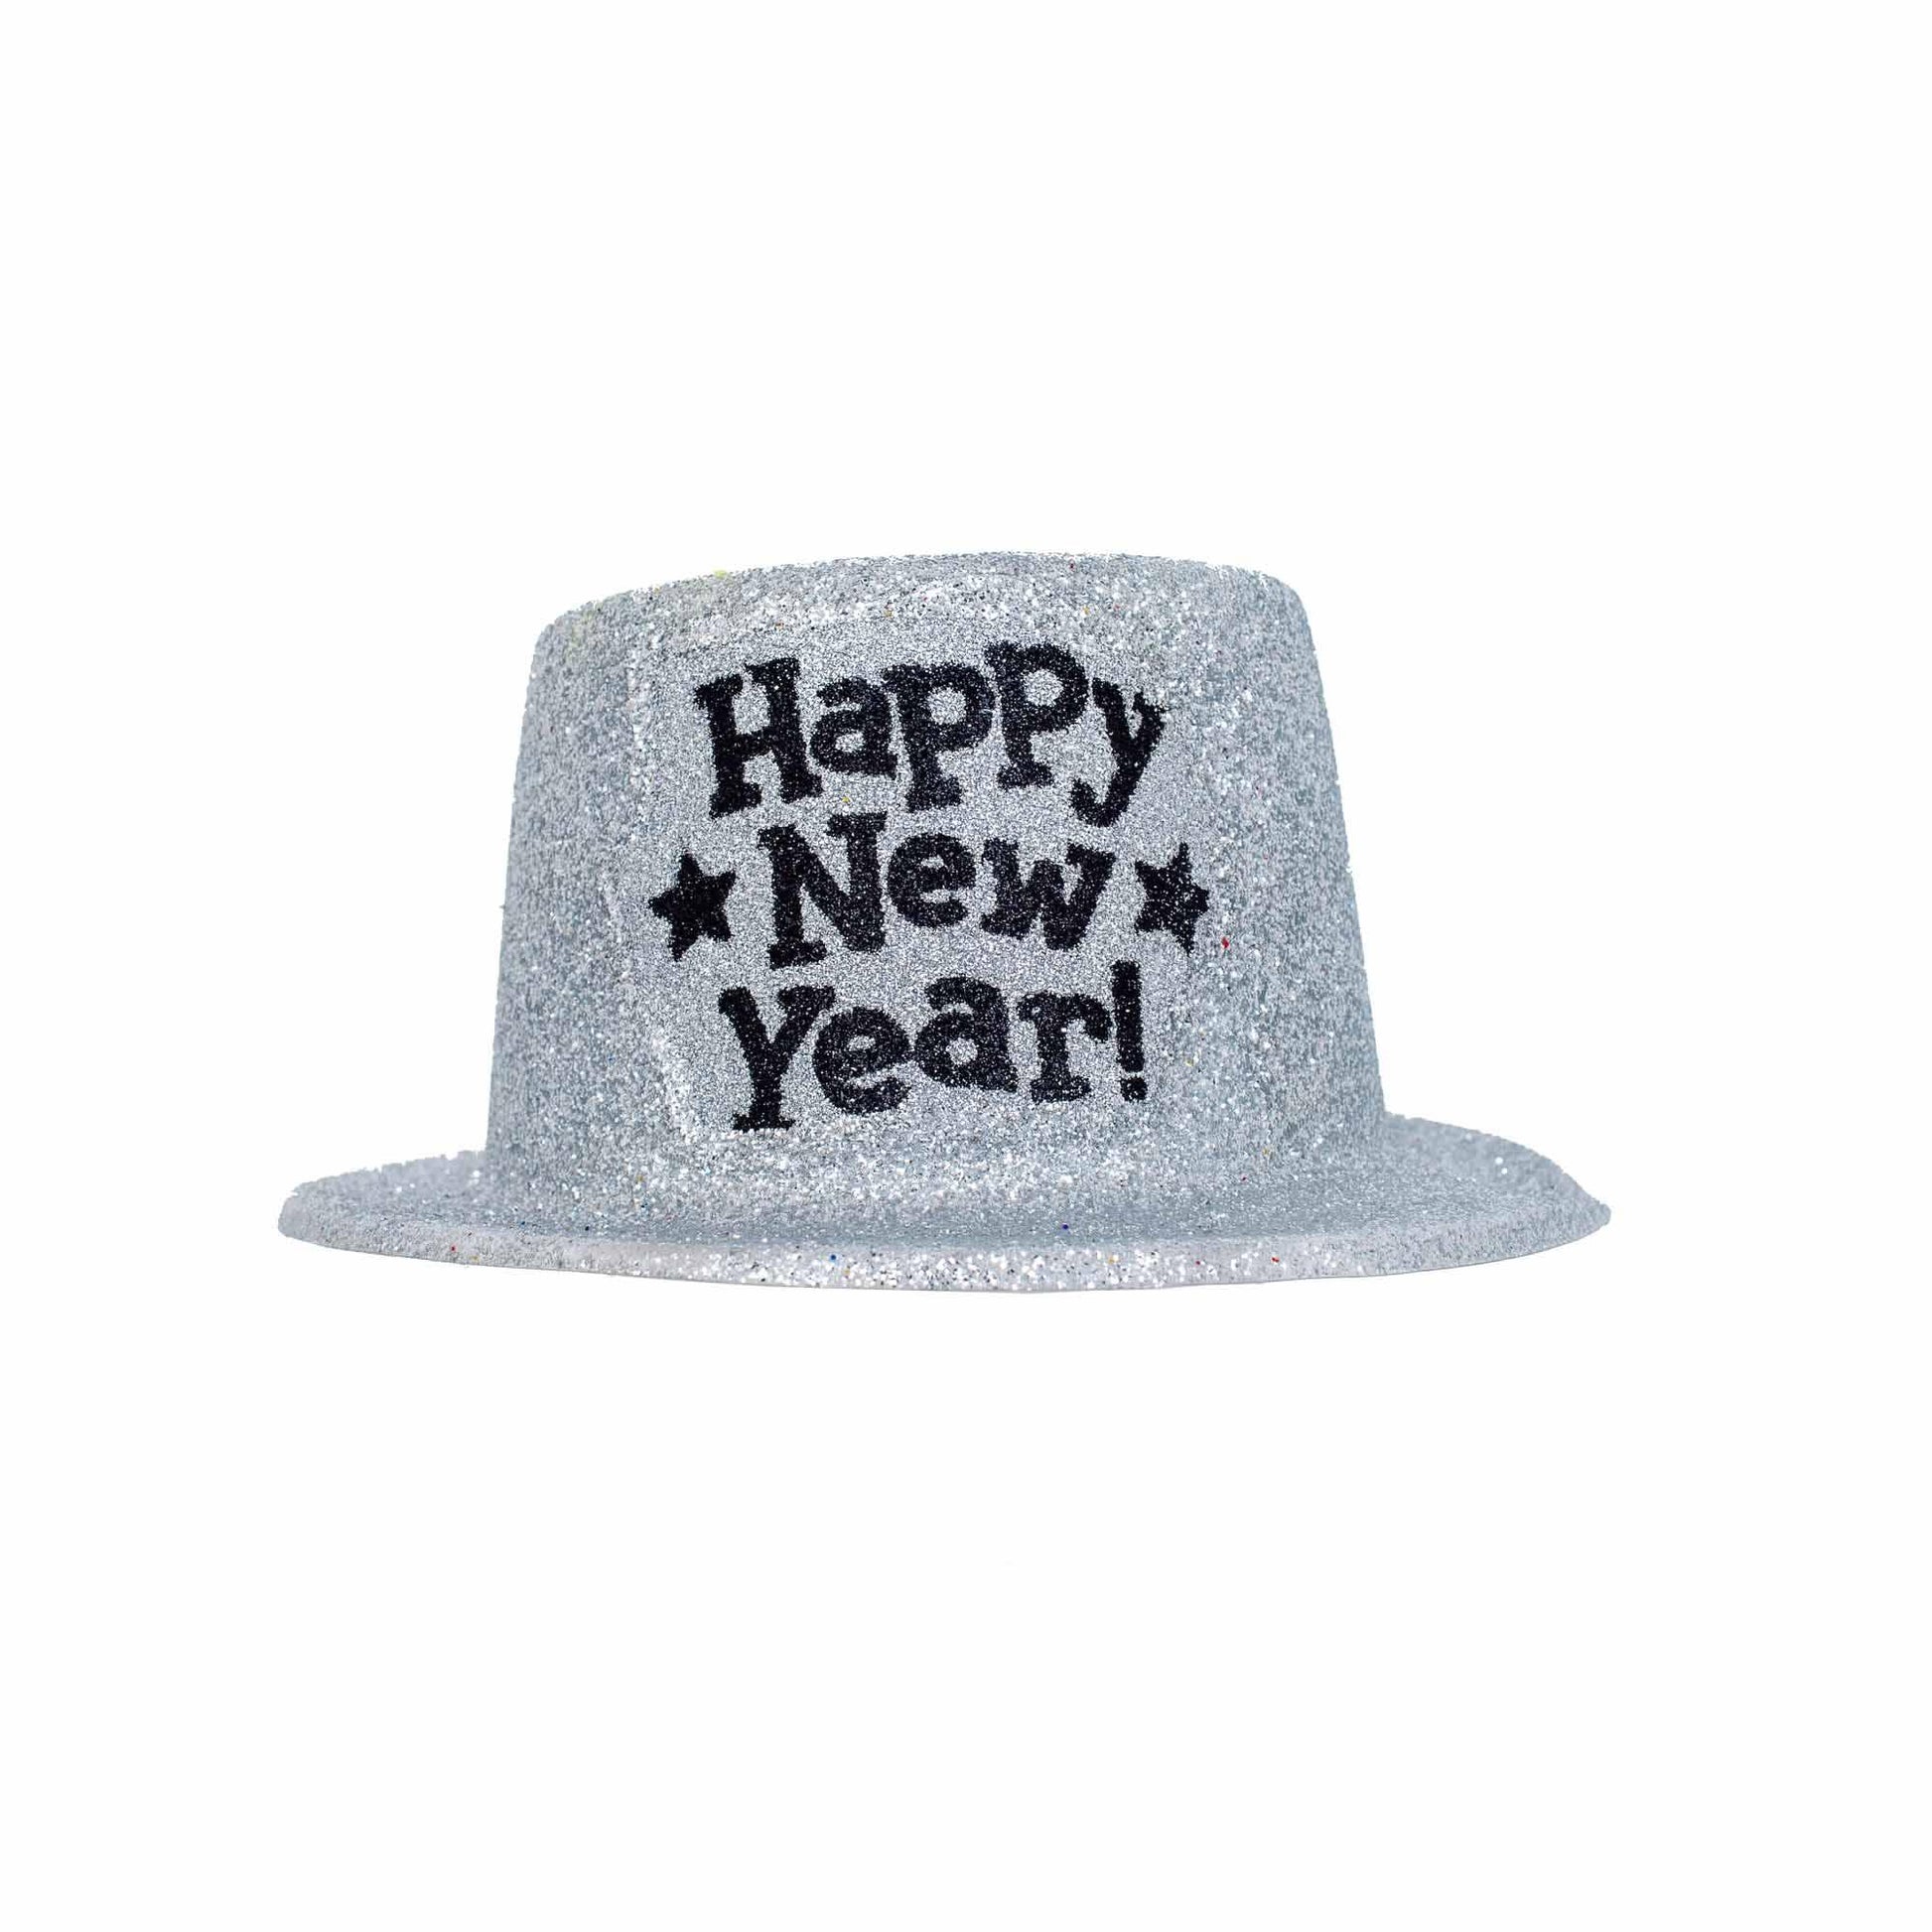 Happy New Year Silver Glitter Top Hat Costumes & Apparel - Party Centre